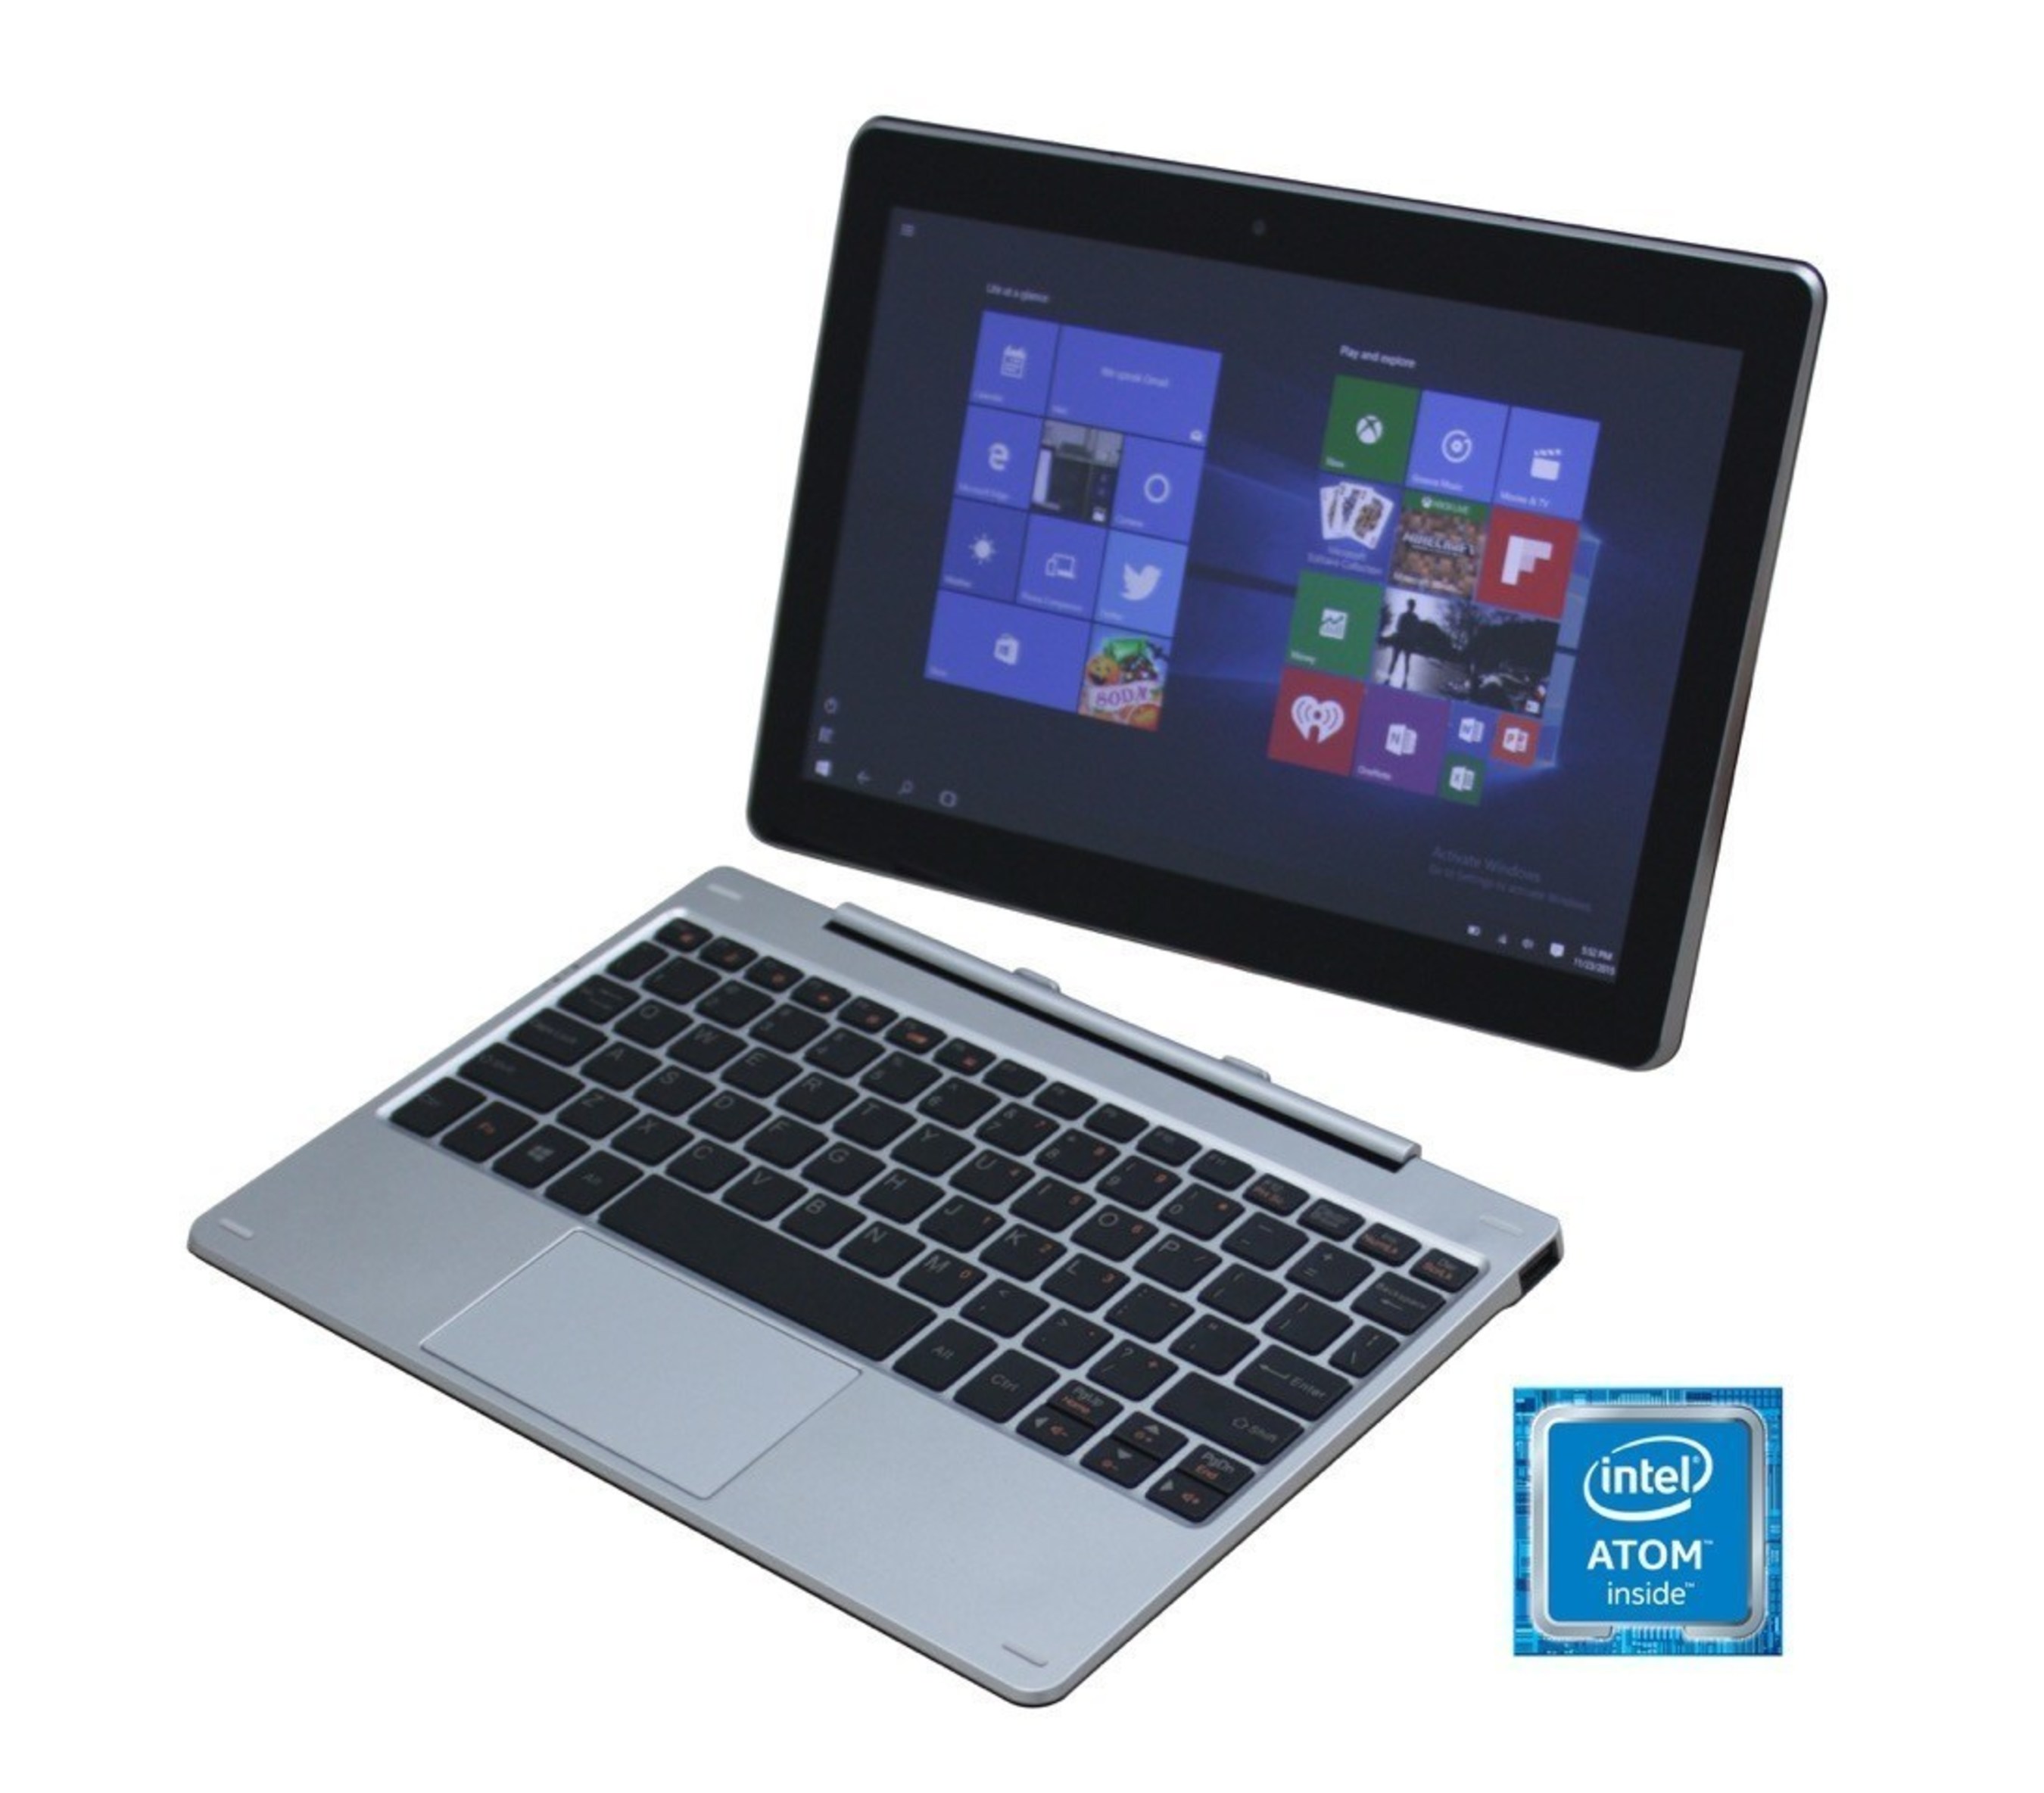 E FUN's Nextbook 10.1 2-in-1 tablet is an ideal computing device for classwork and extracurricular activities